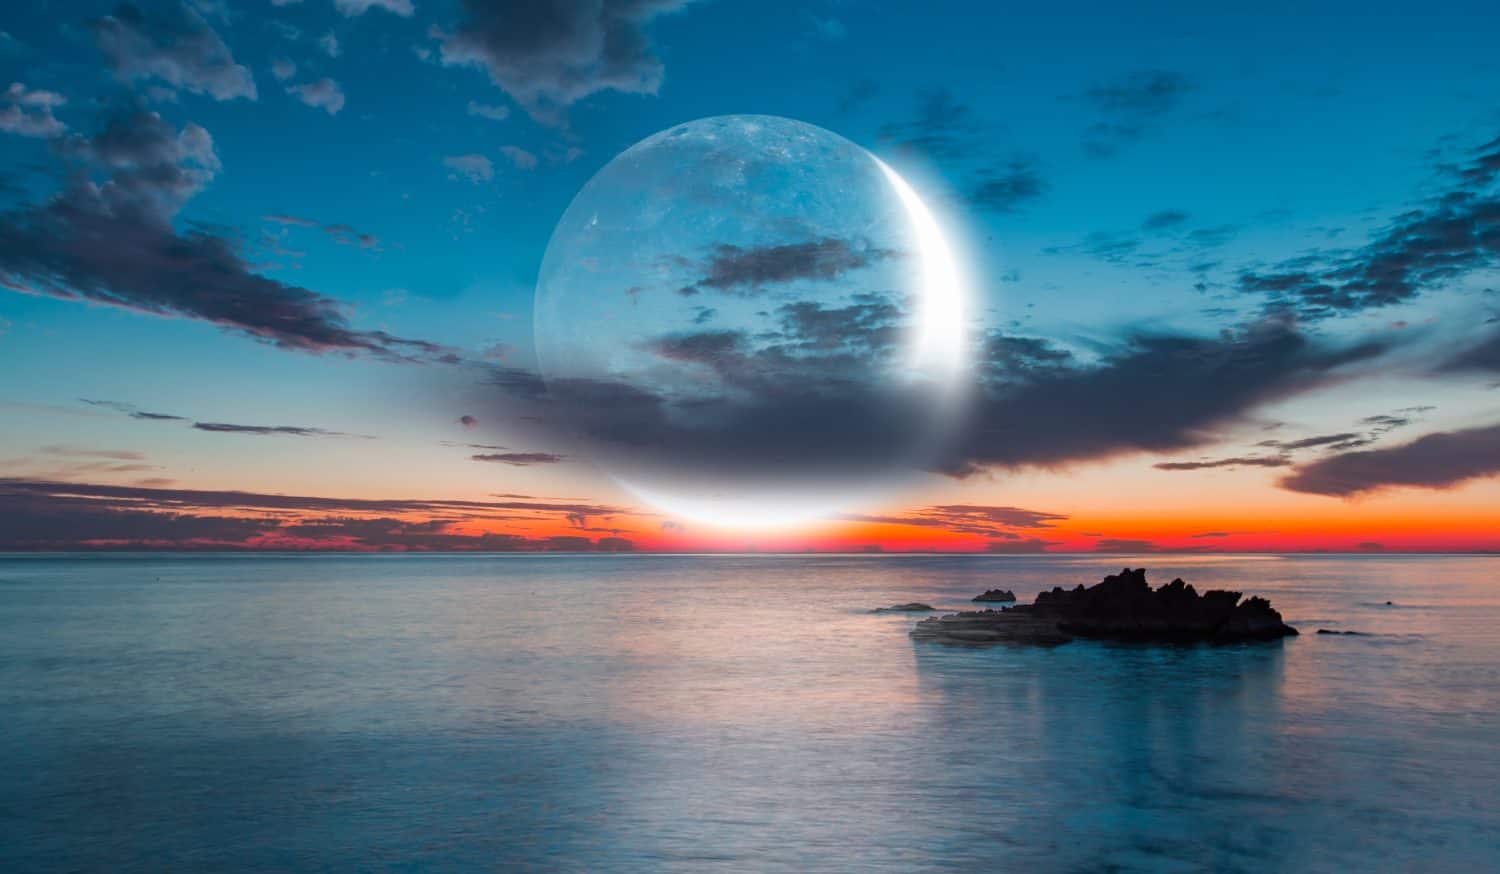 Abstract background with Crescent moon over the sea at sunset